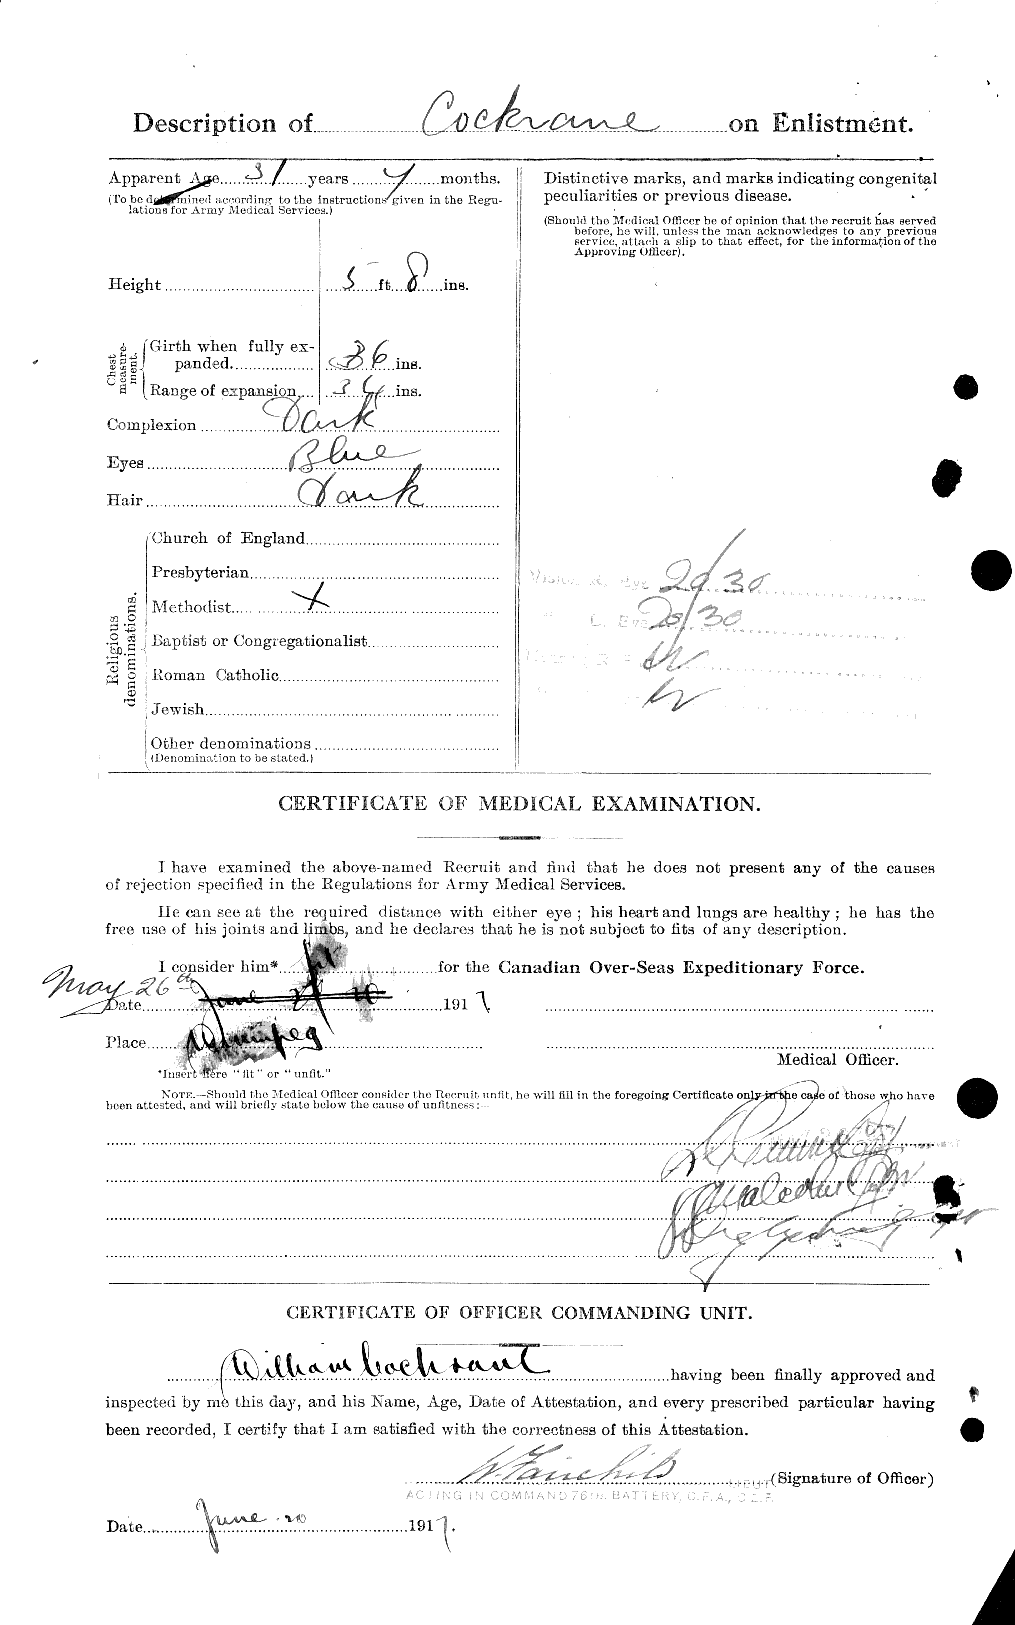 Personnel Records of the First World War - CEF 026497b